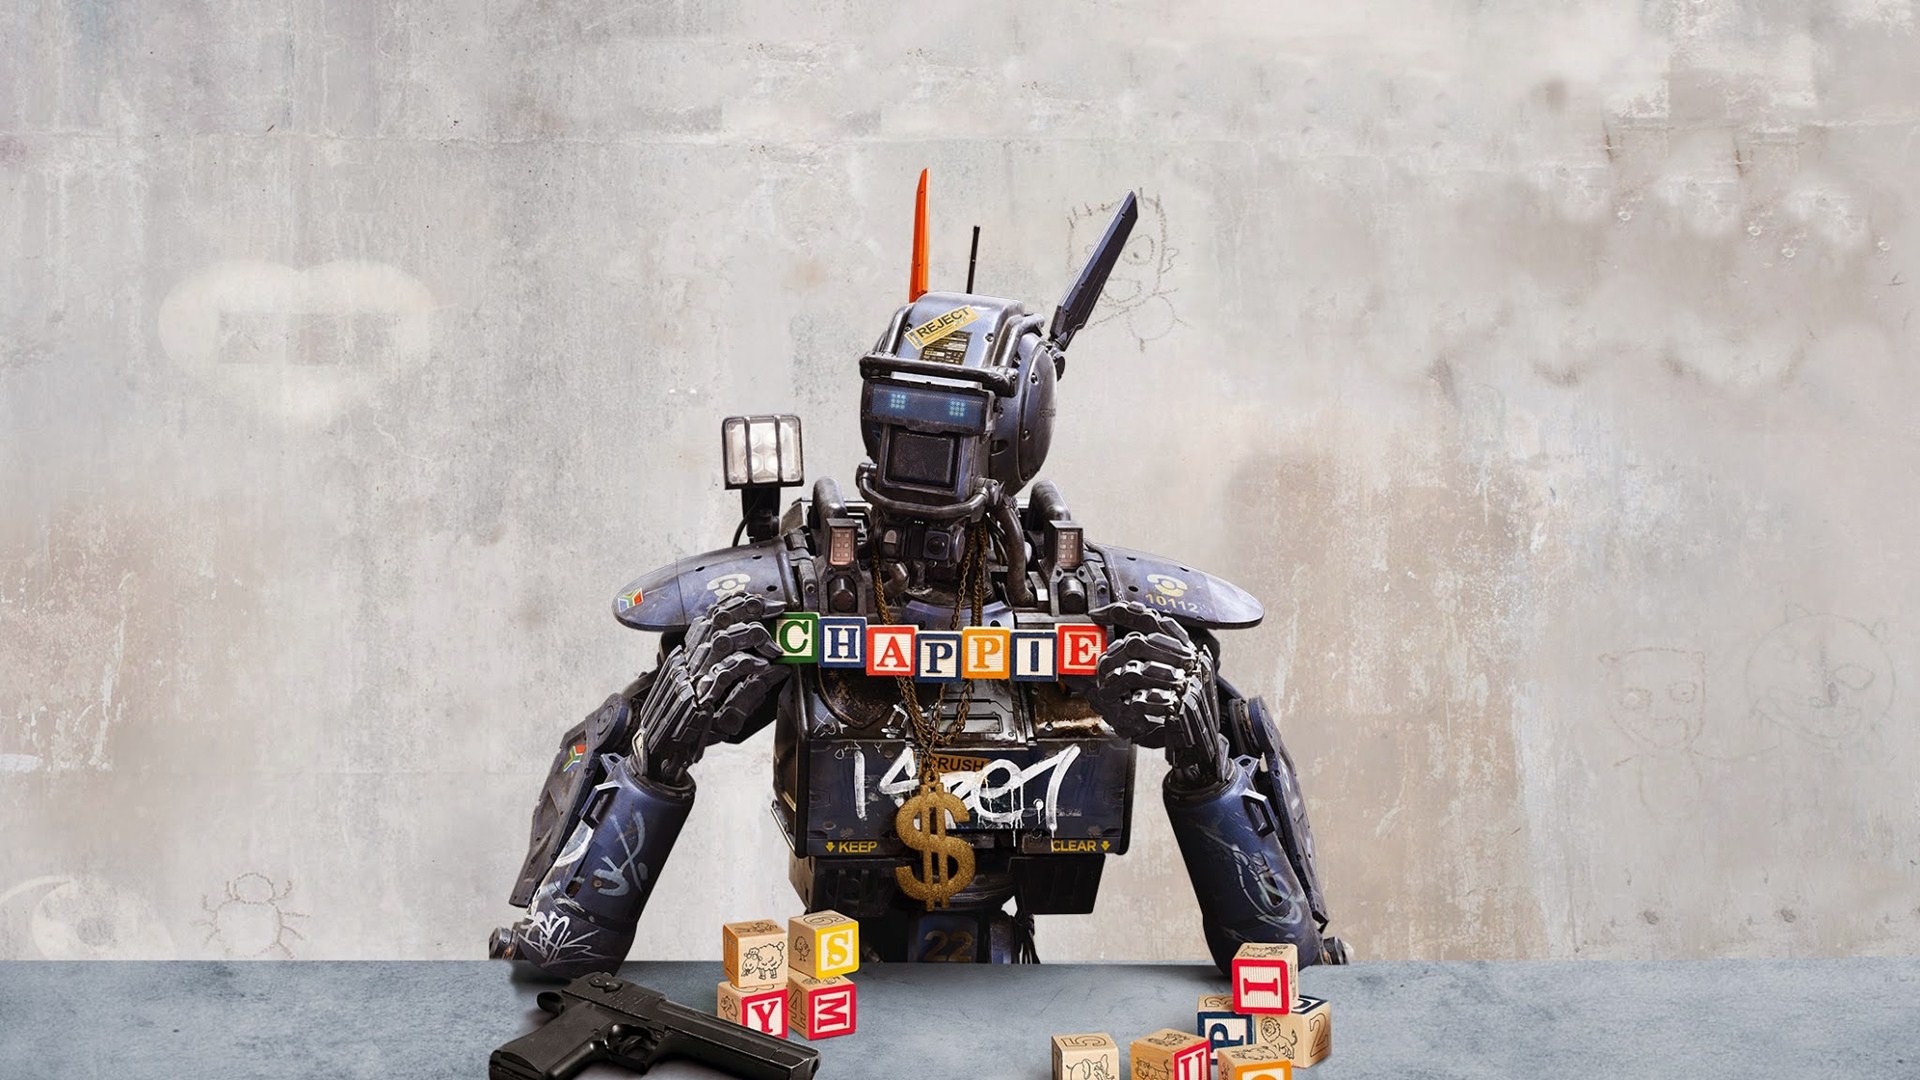 Geek insider, geekinsider, geekinsider. Com,, the newest addition to a pantheon of sentient robot films: chappie, entertainment